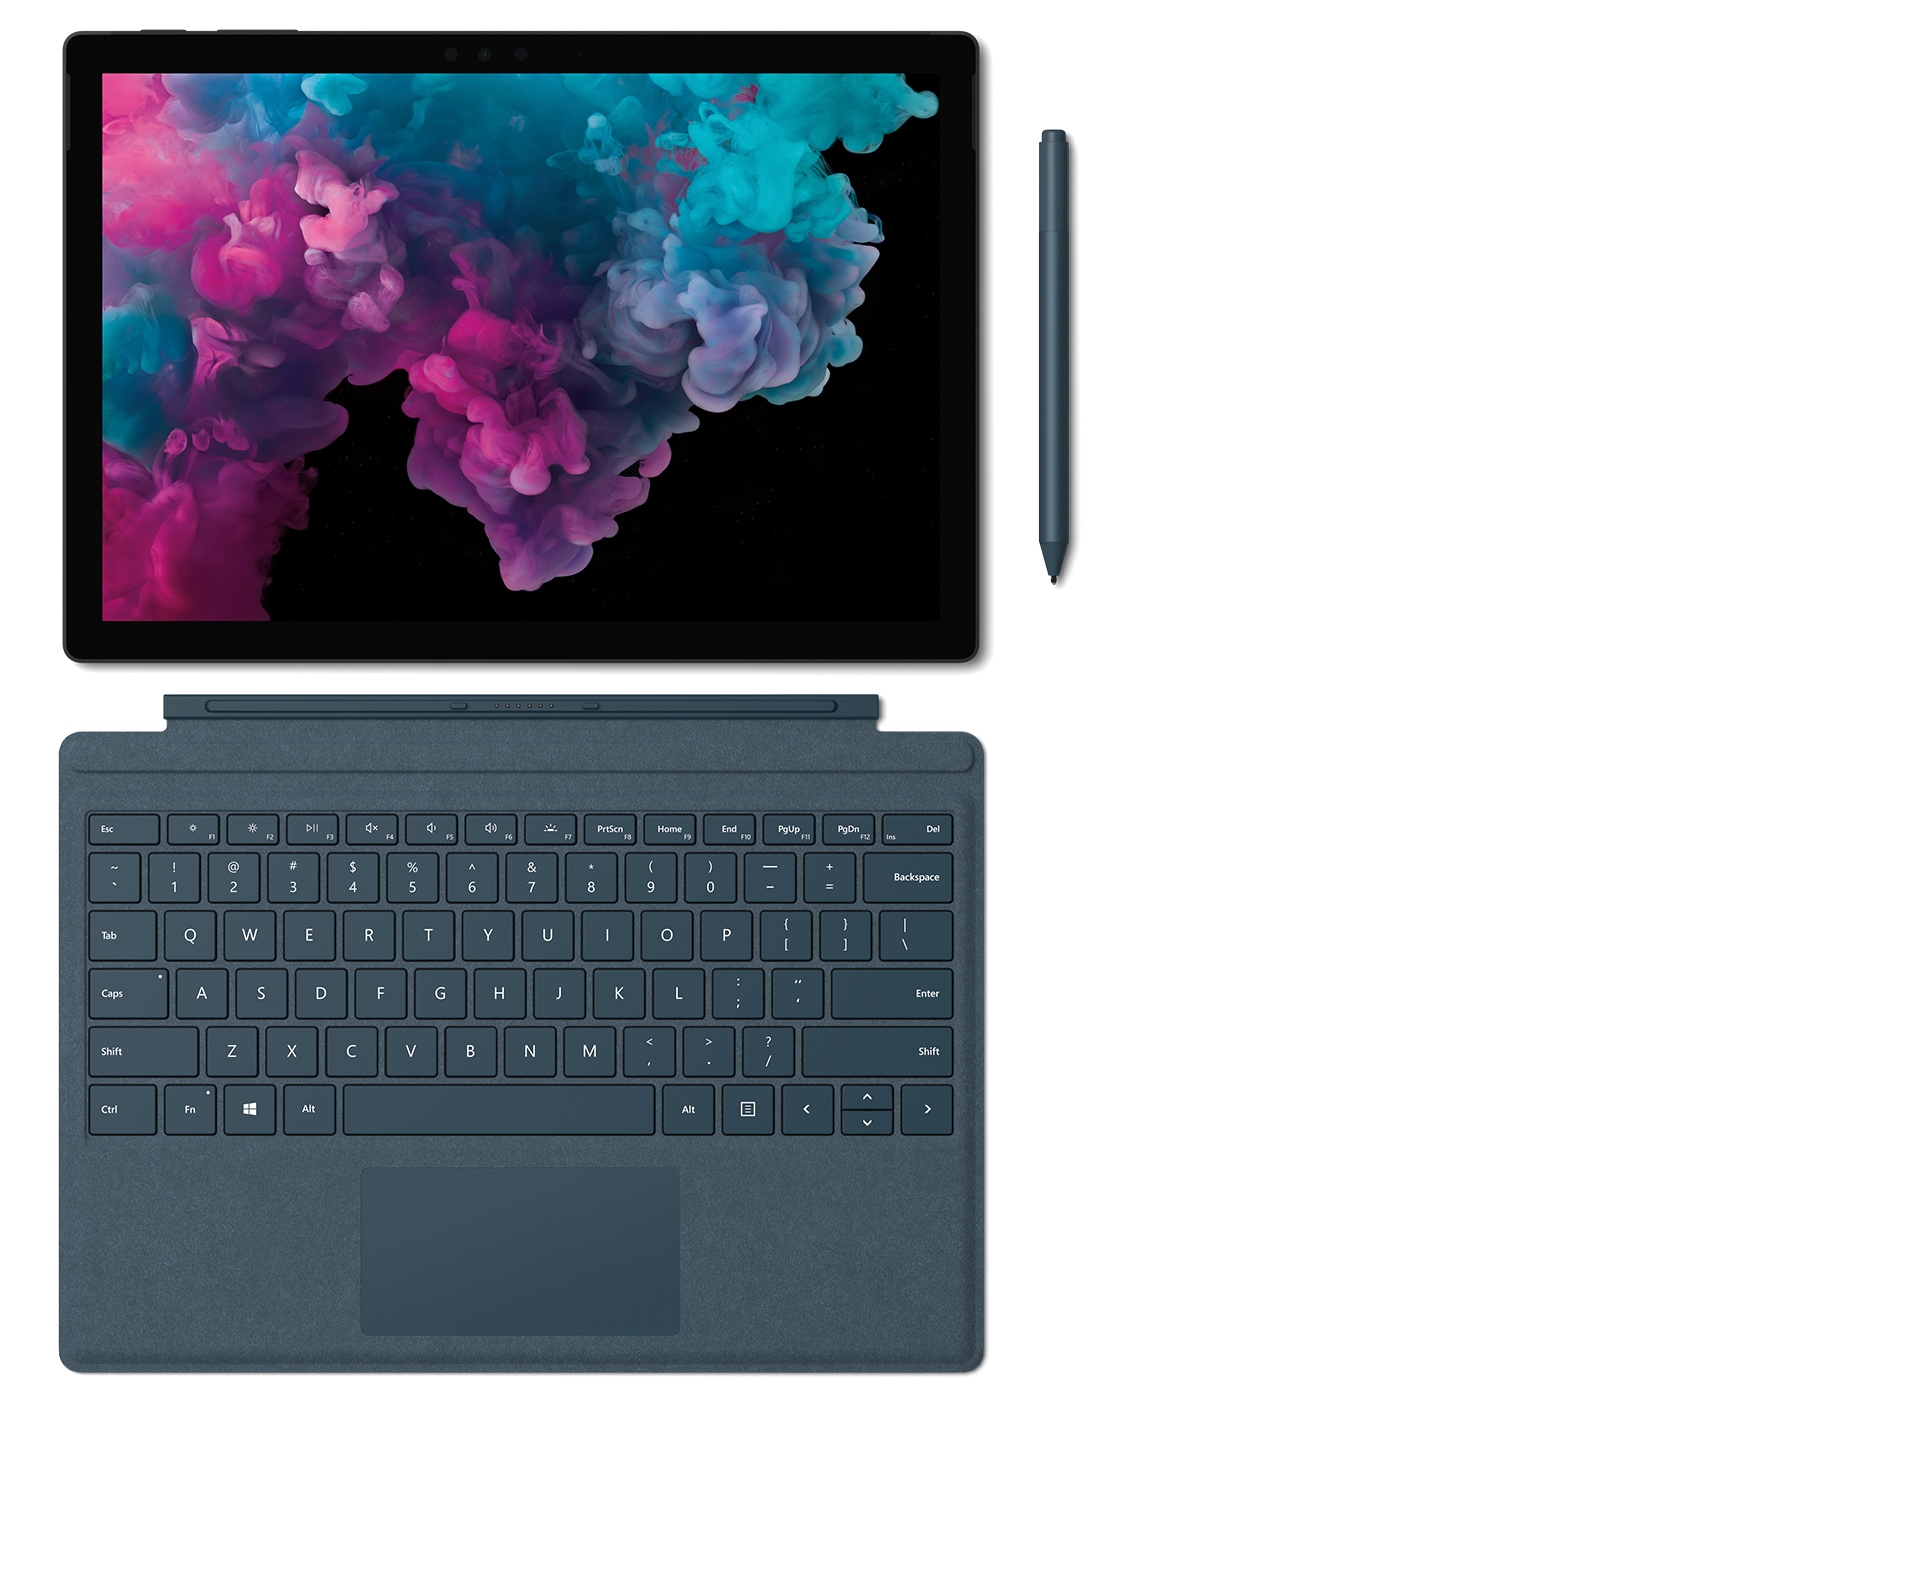 Surface Pro 6 with Surface Type Cover, Surface Pen and Surface Arc Mouse. 